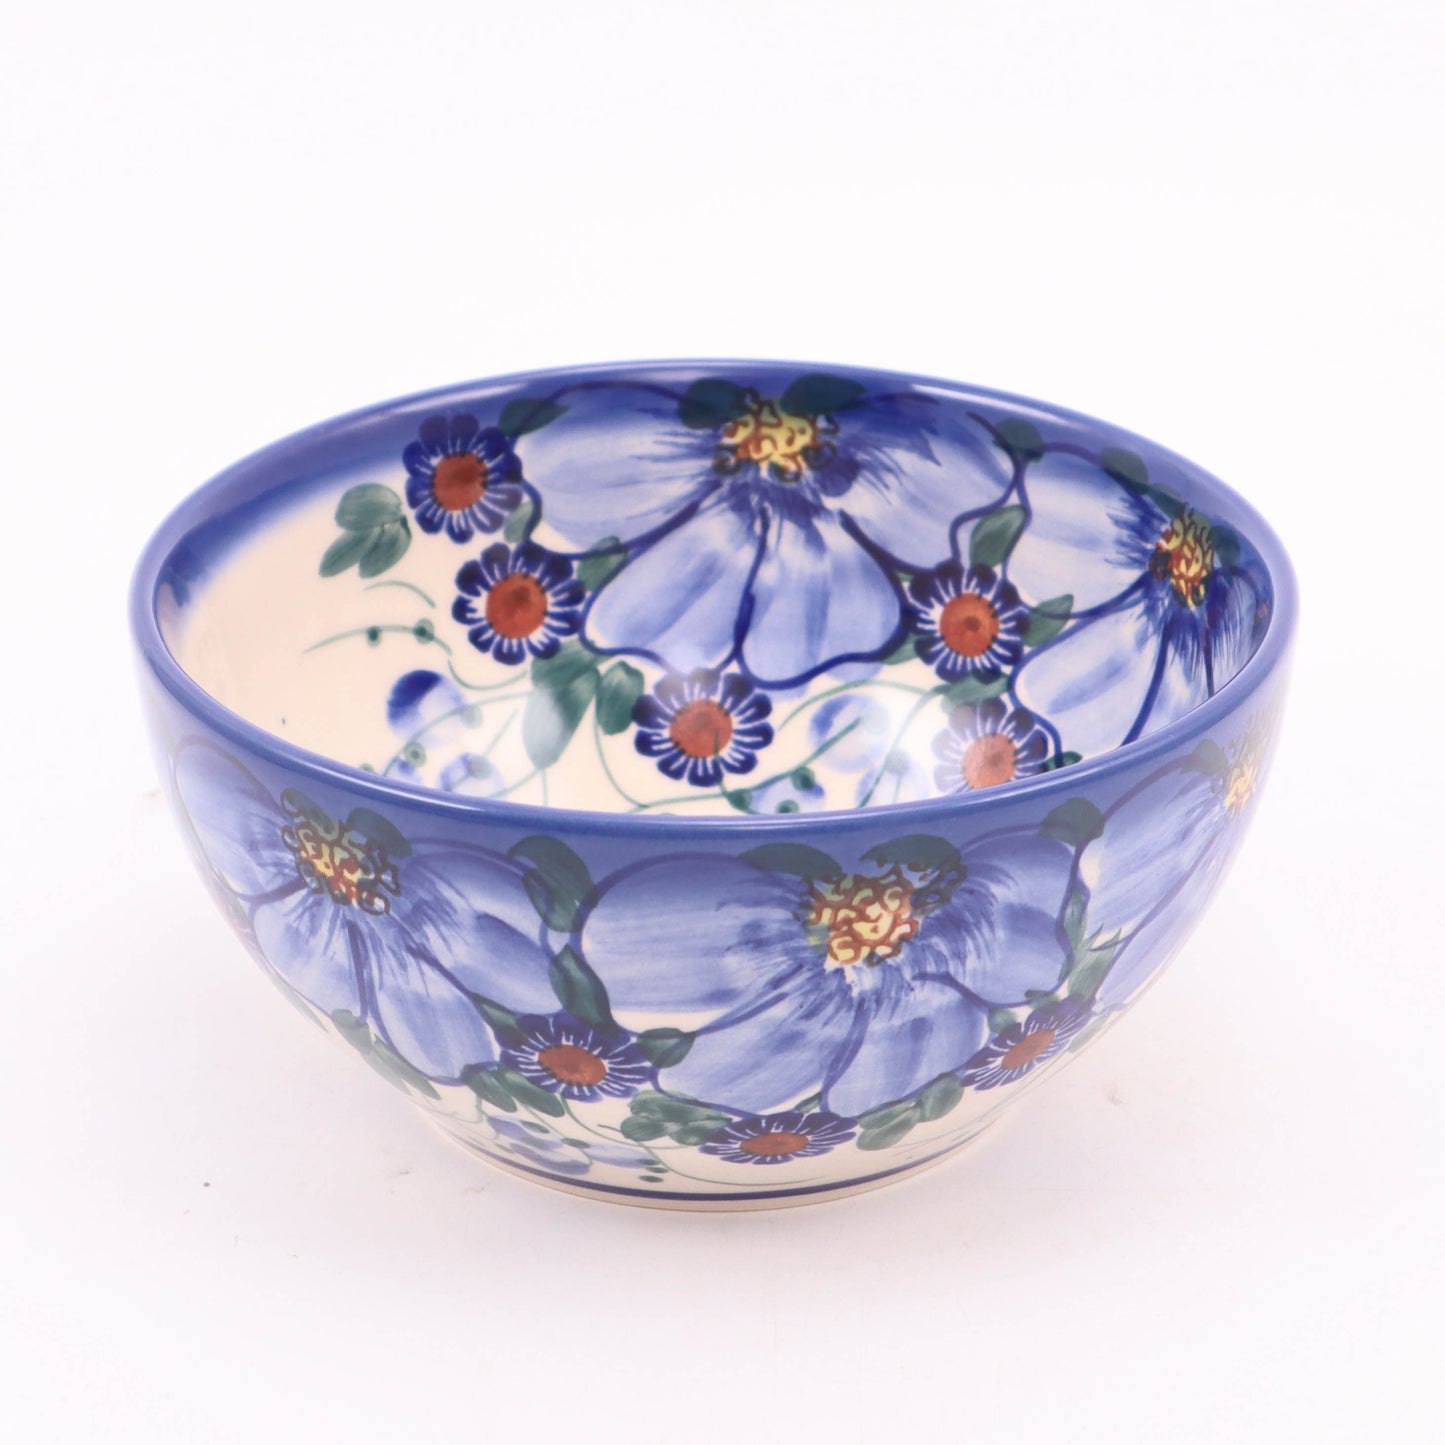 6" Cereal Bowl. Pattern: Passion